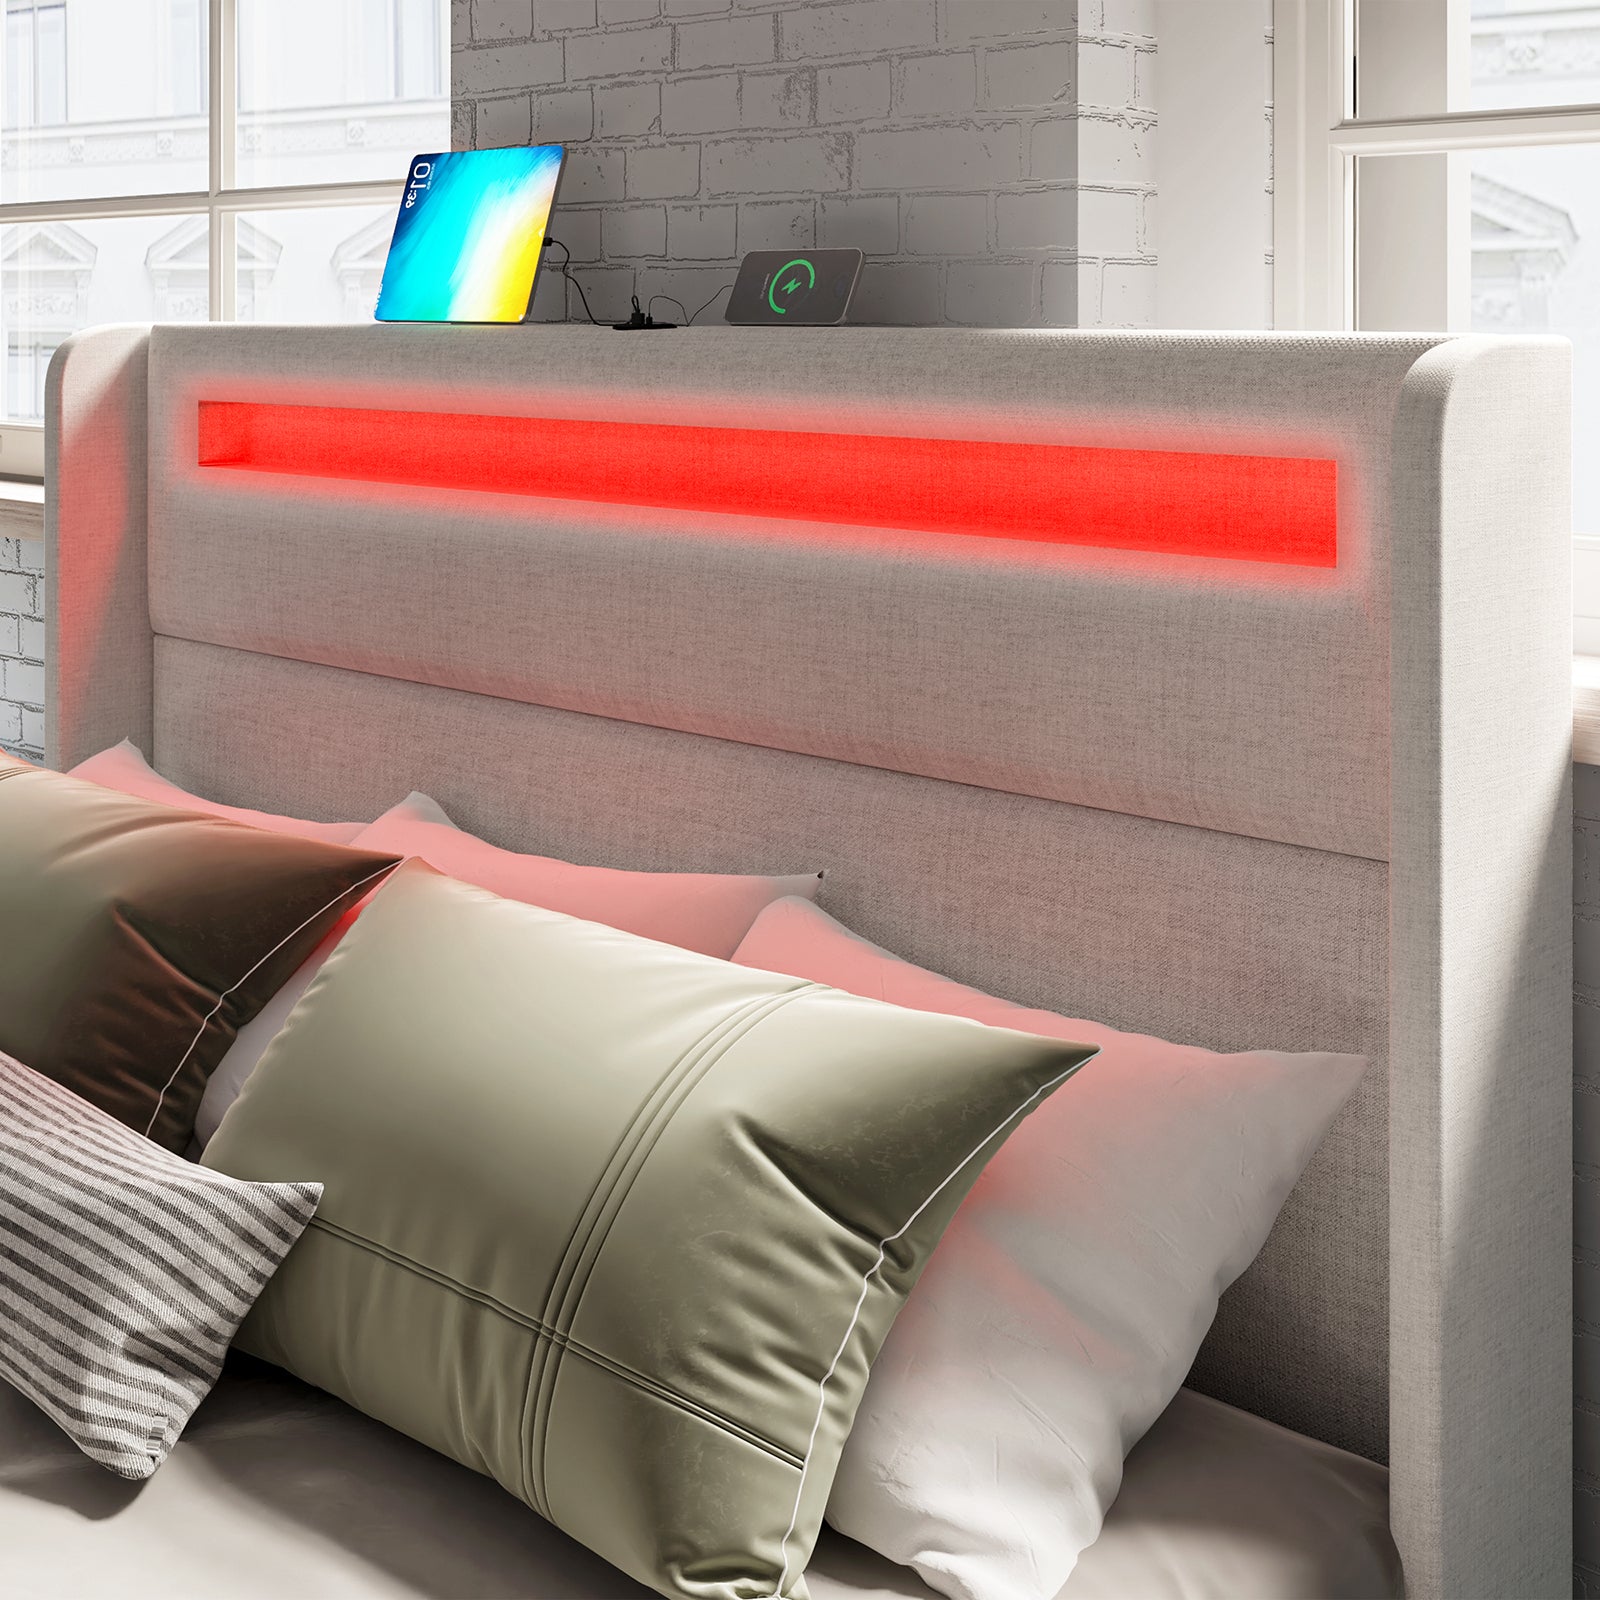 A close up of the cream colored albion king's integrated RGB headboard and device charging nook